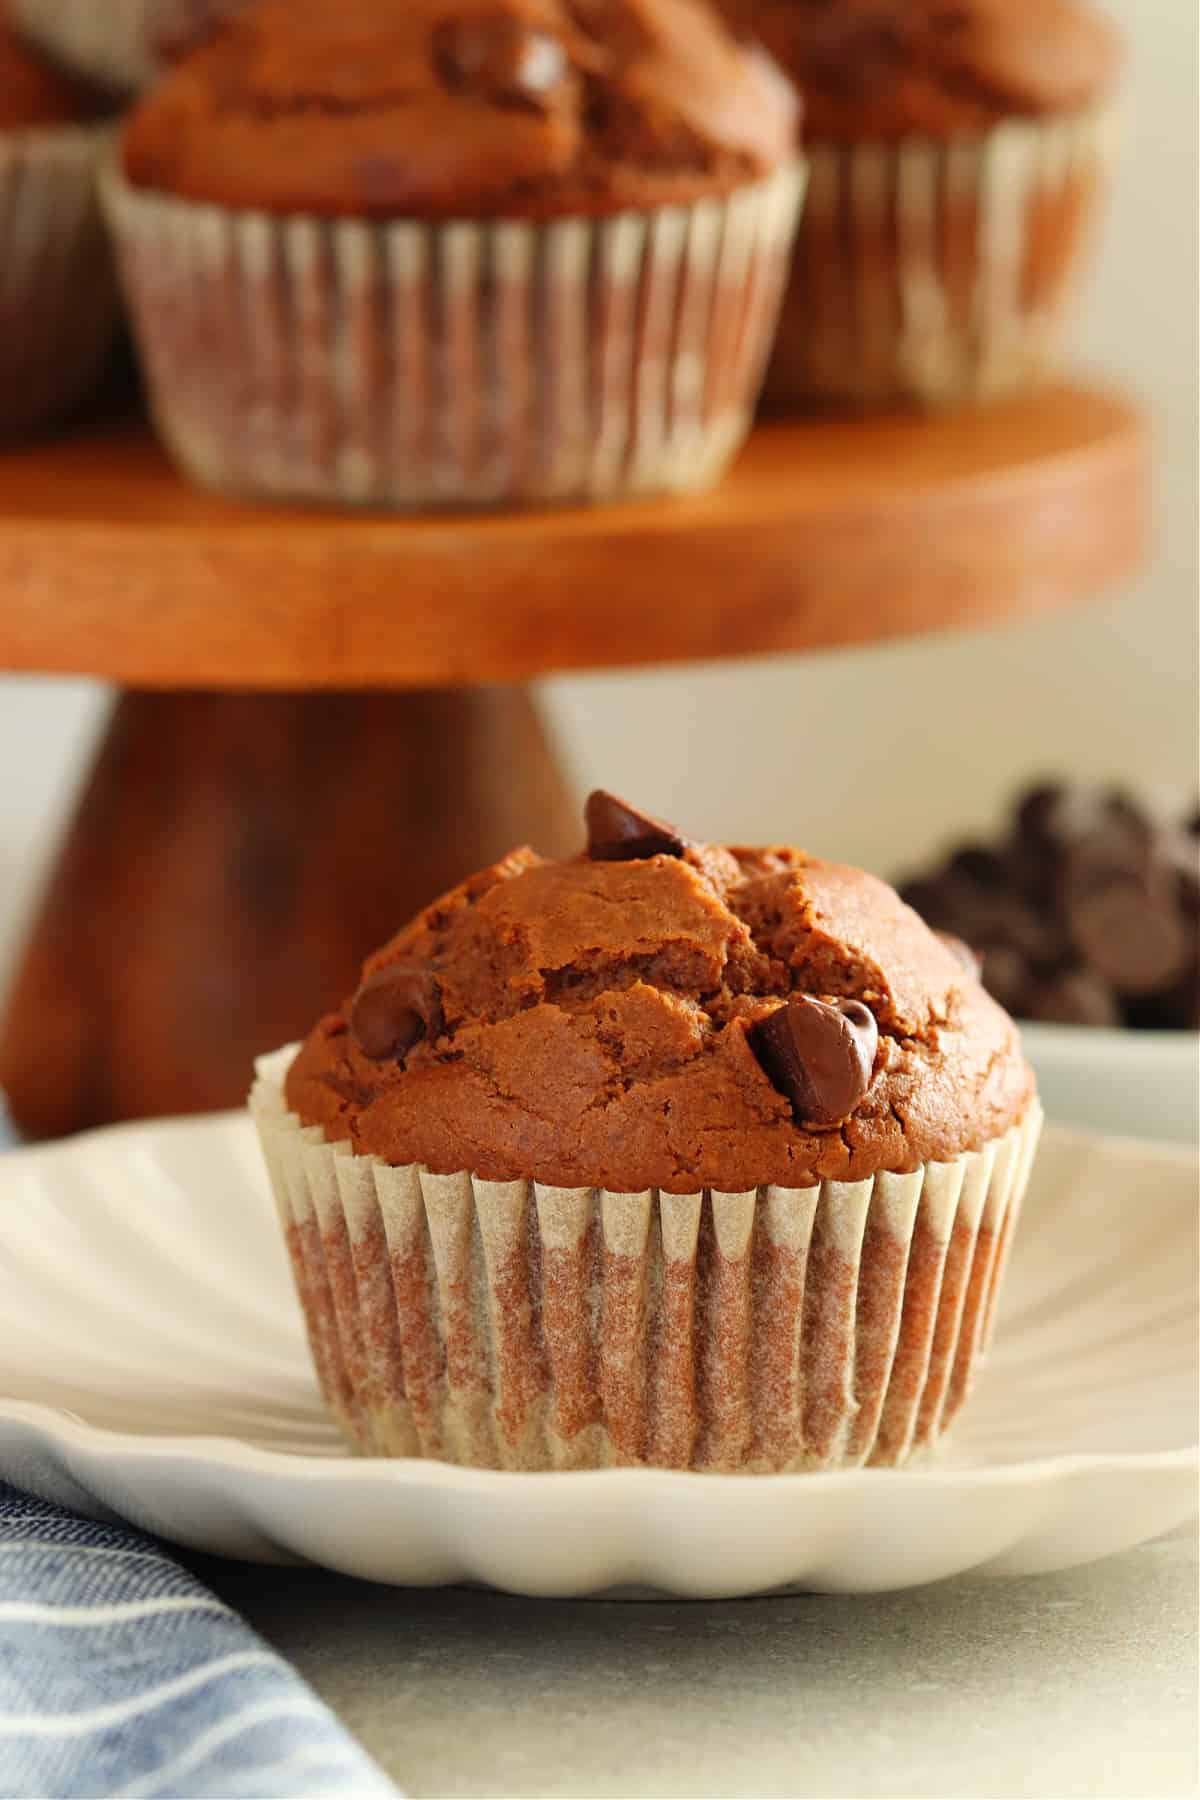 Chocolate muffin on a small plate with more muffins on a wooden cake stand in the background.